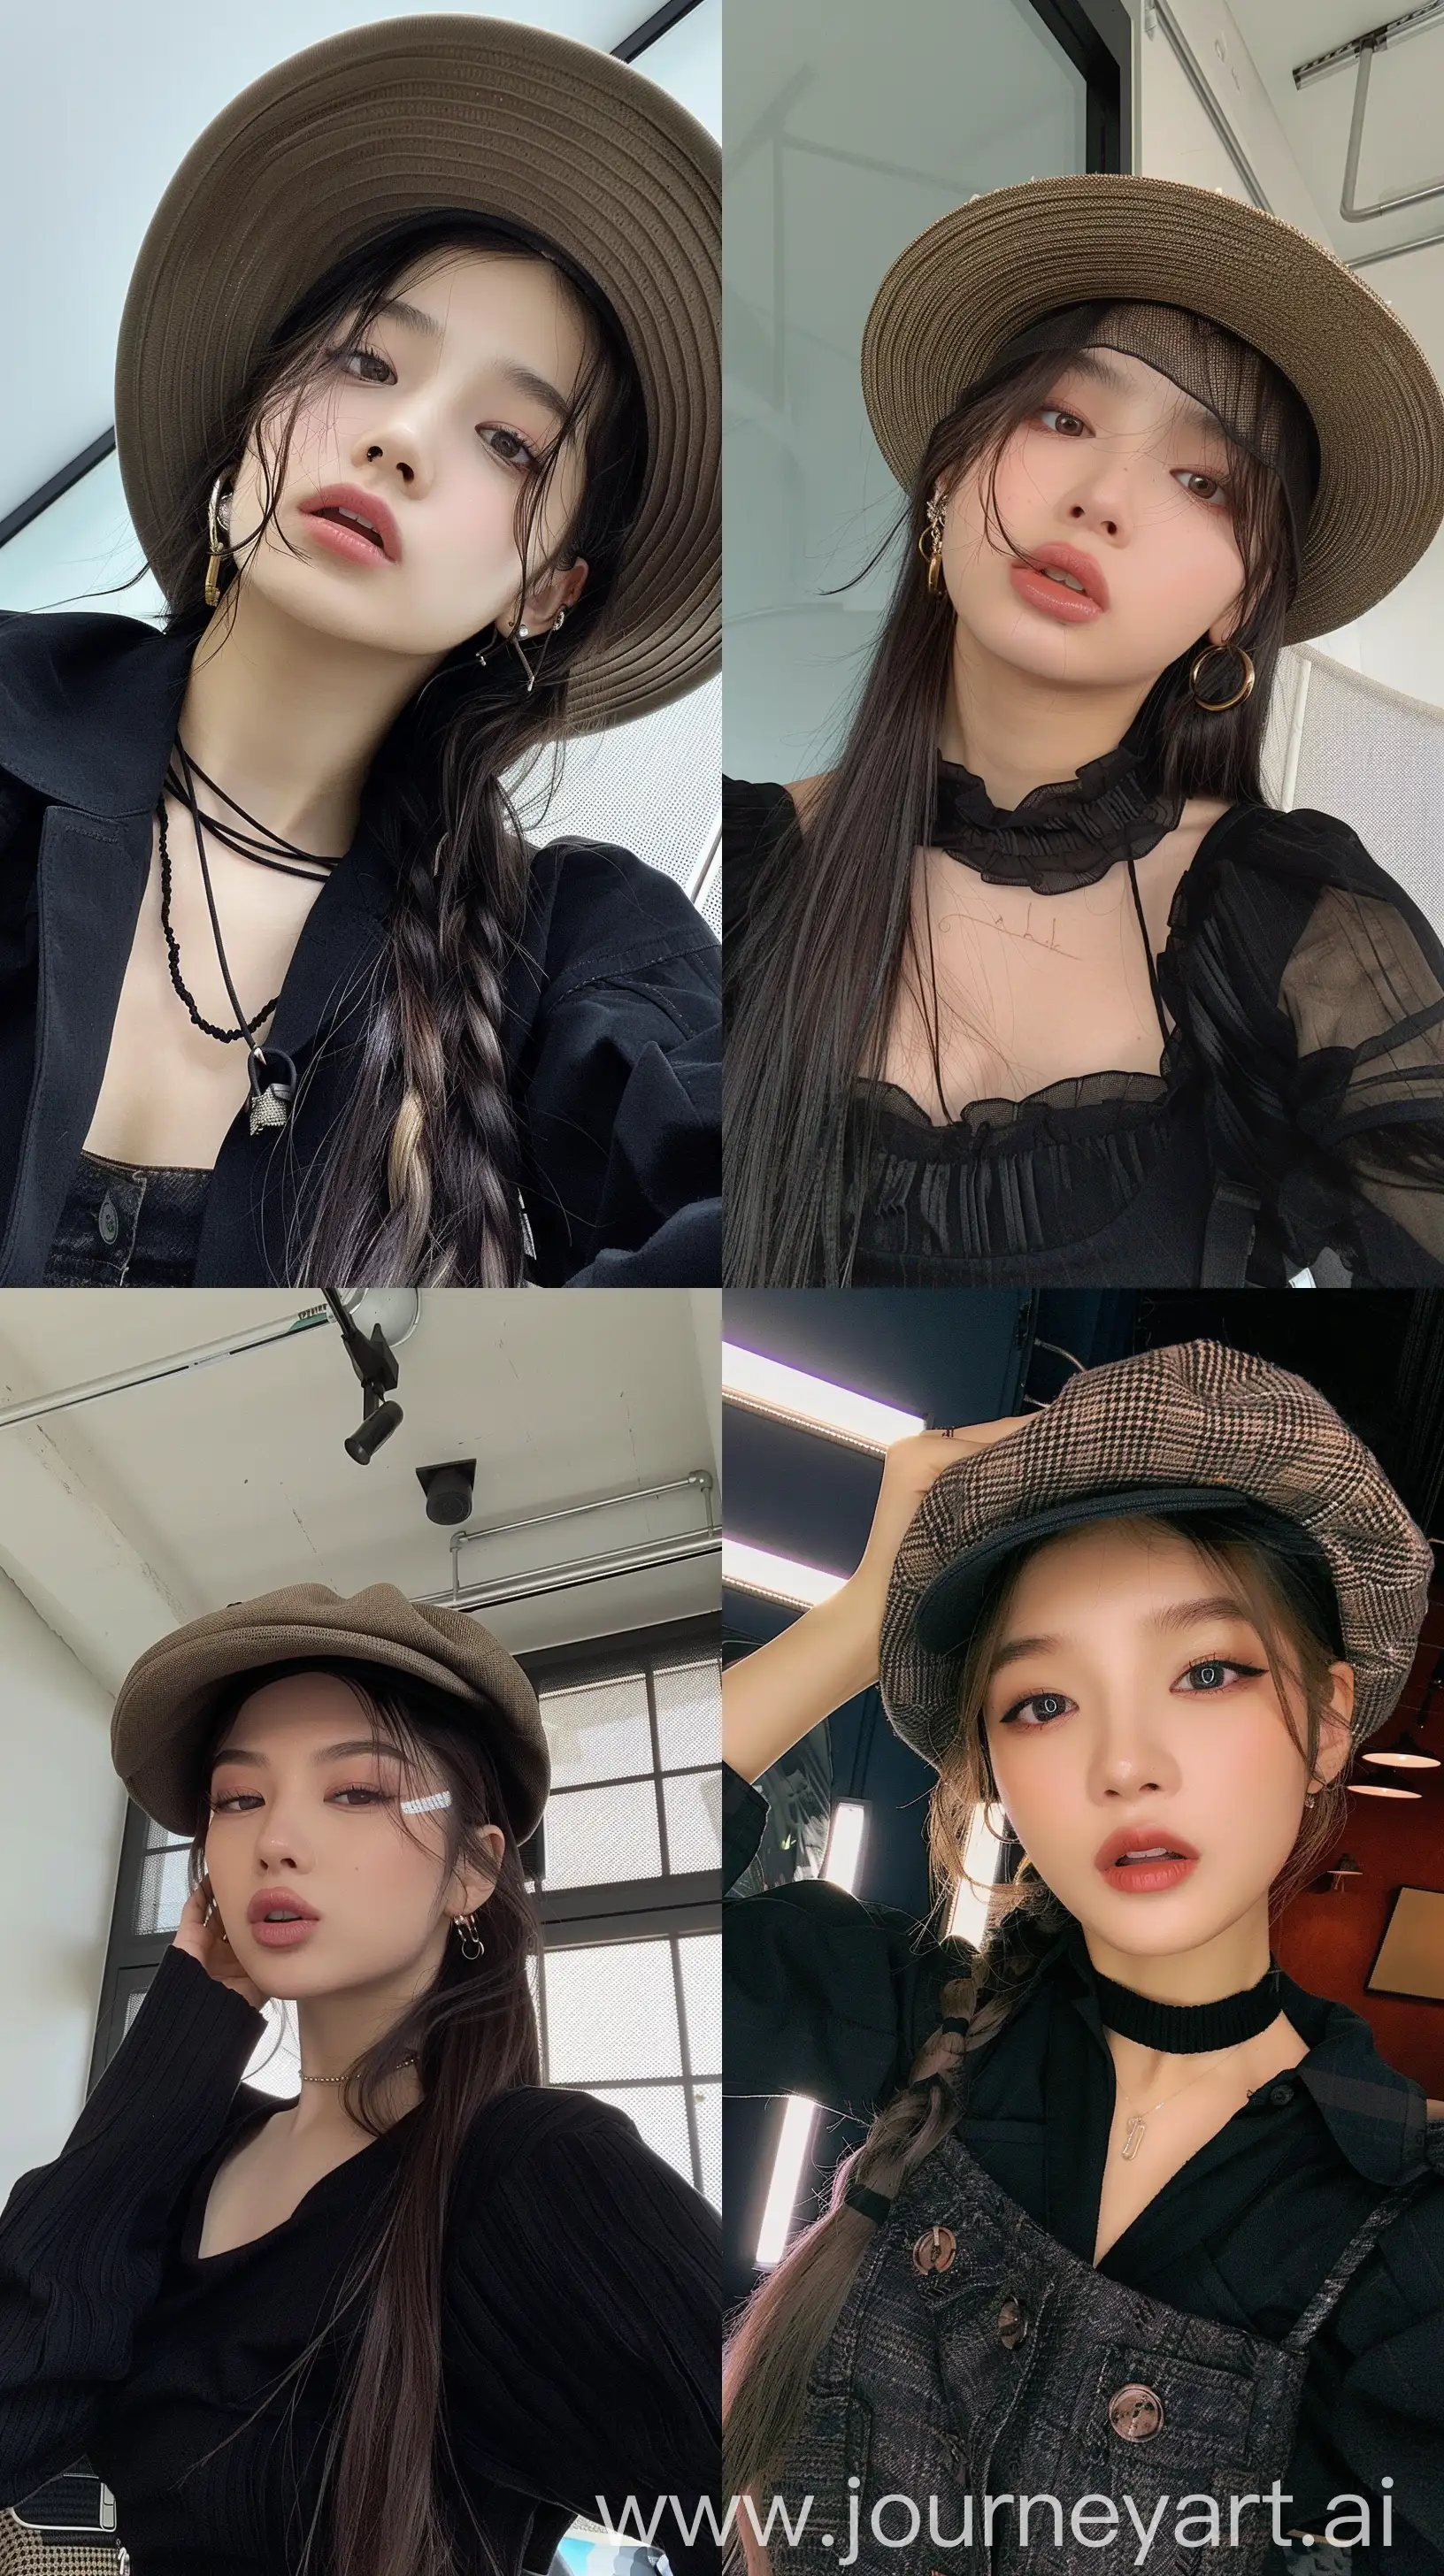 Blackpinks-Jennie-Selfie-Aesthetic-Black-Outfit-and-Stylish-Flat-Hat